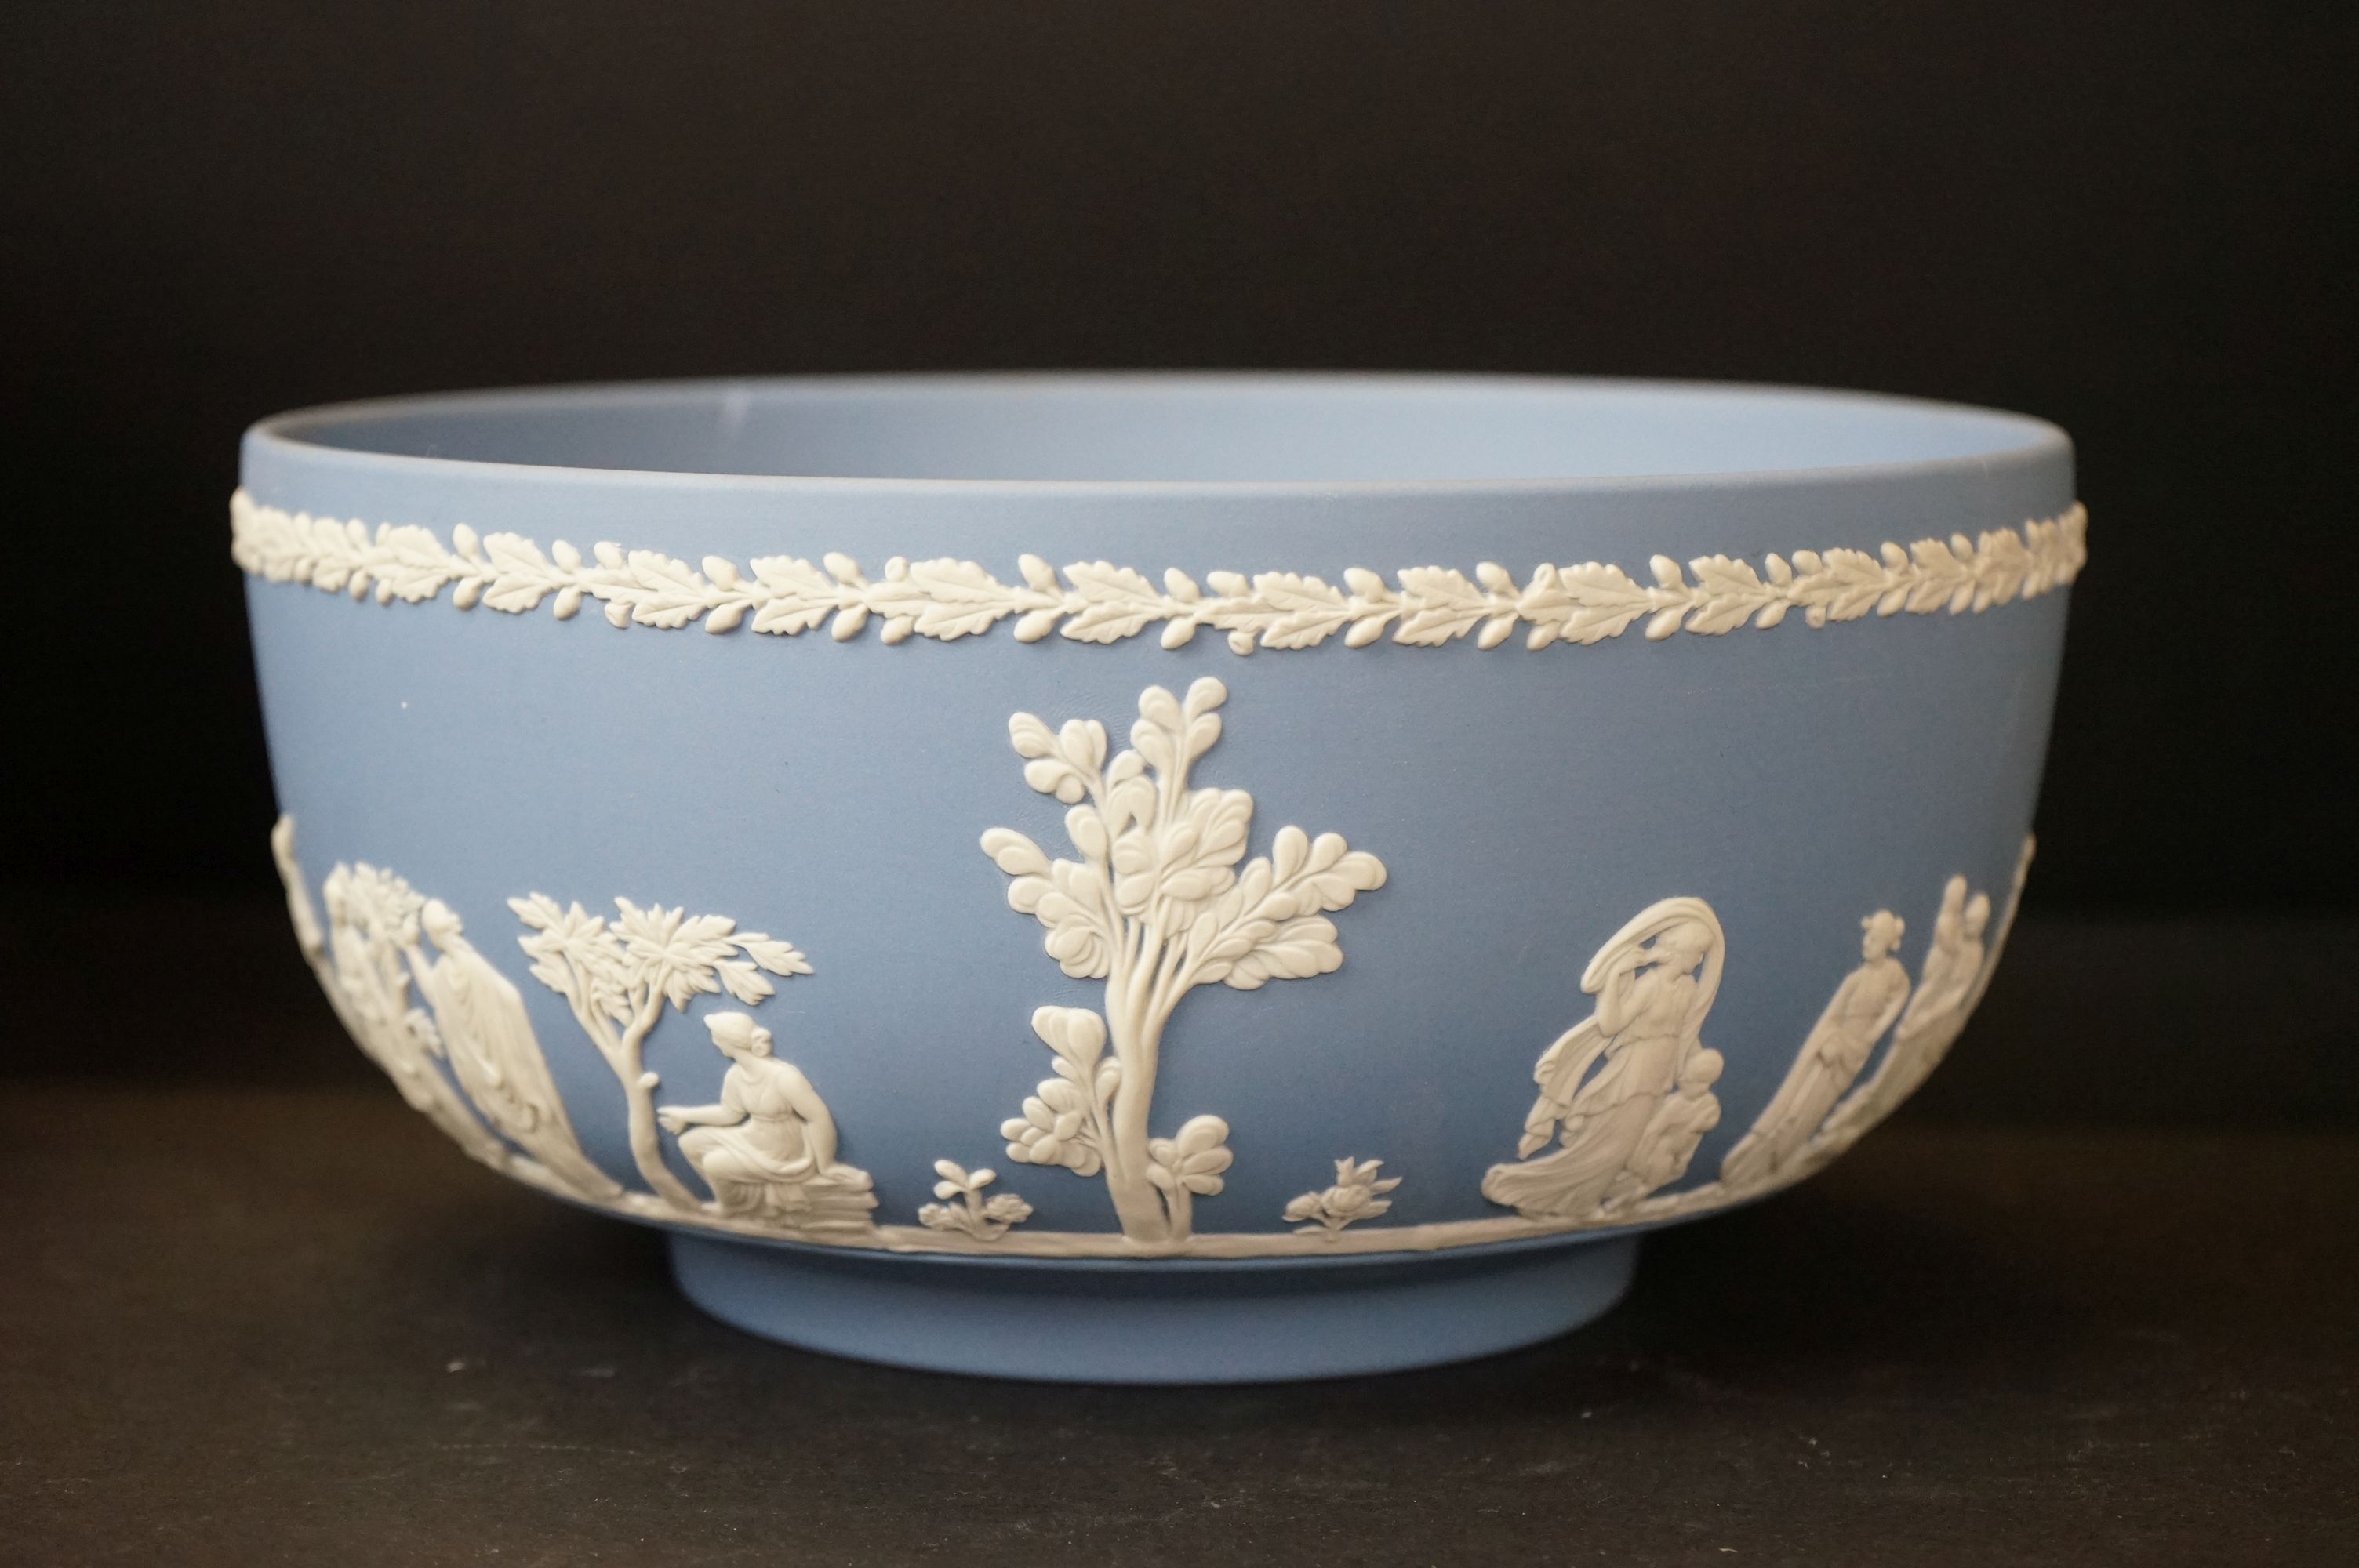 Quantity of Wedgwood Jasperware - to include a quartz mantle clock, bowl, tazza, a pair of - Image 6 of 8